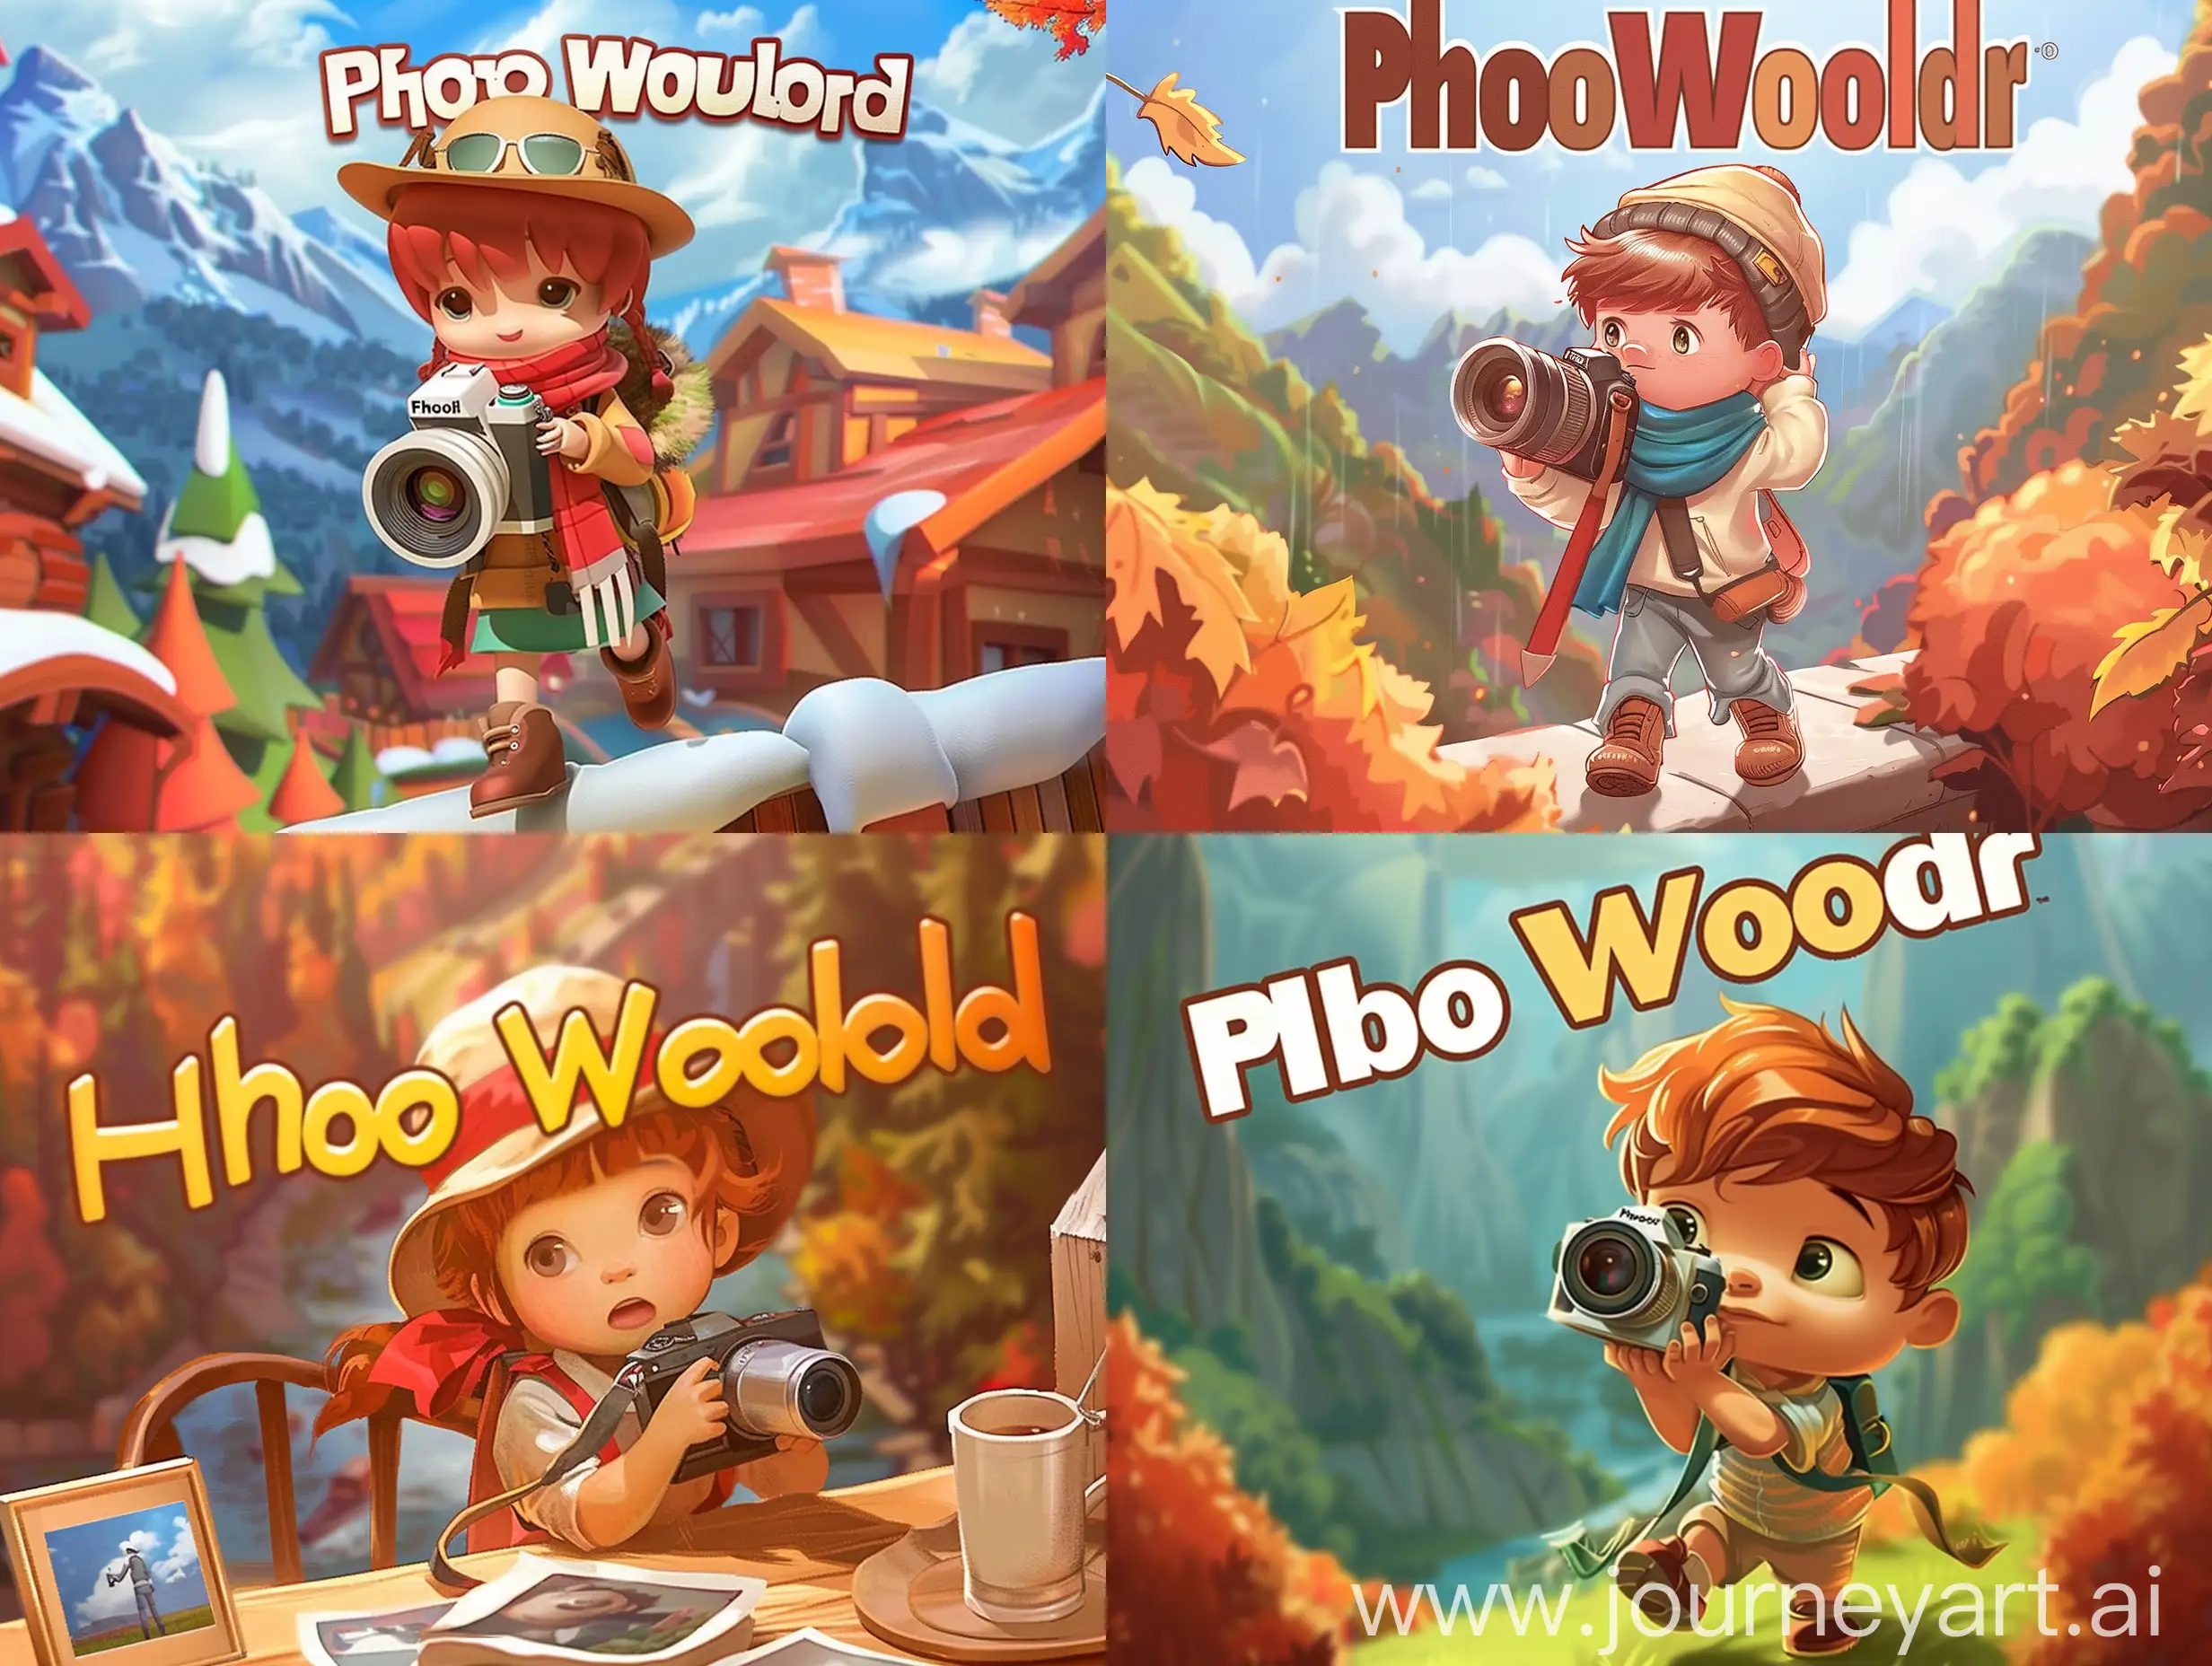 Cute cover for a game about a photographer, the inscription "PhotoWorld"